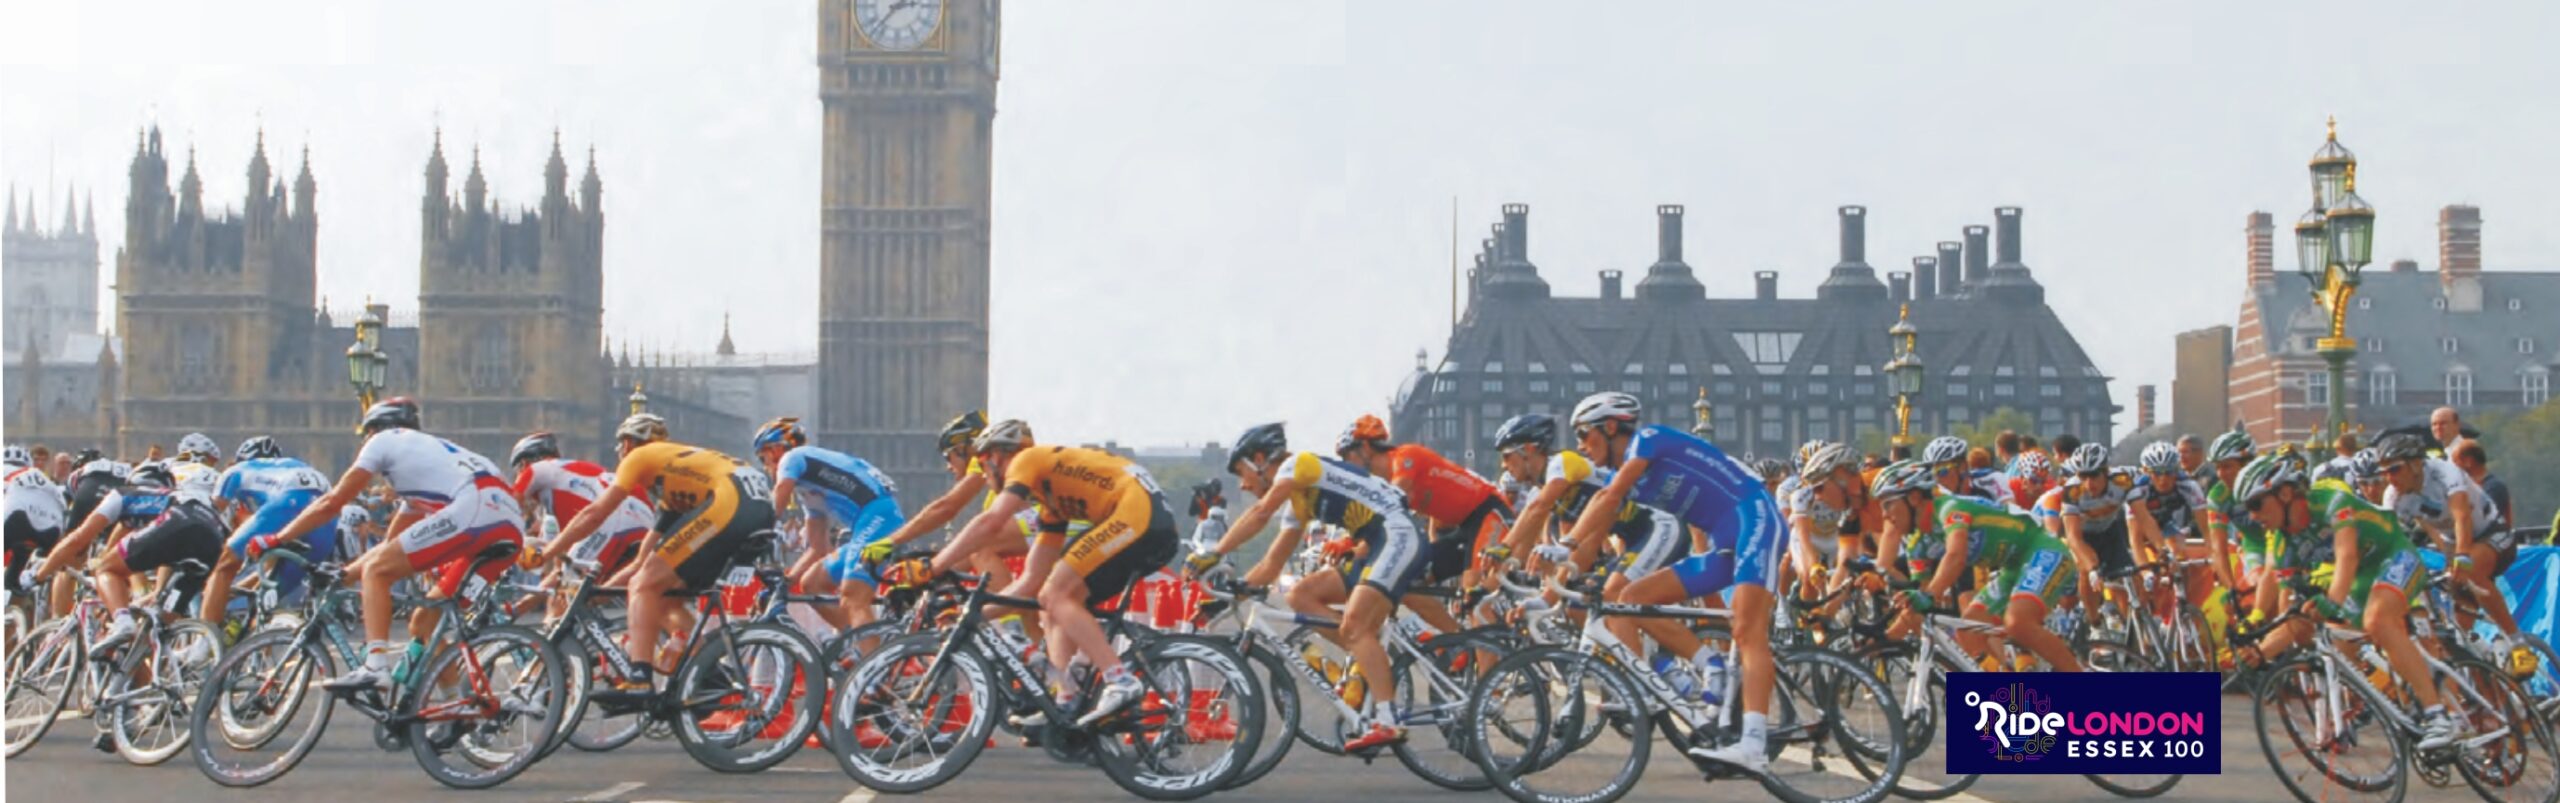 ride london 100 for get kids going